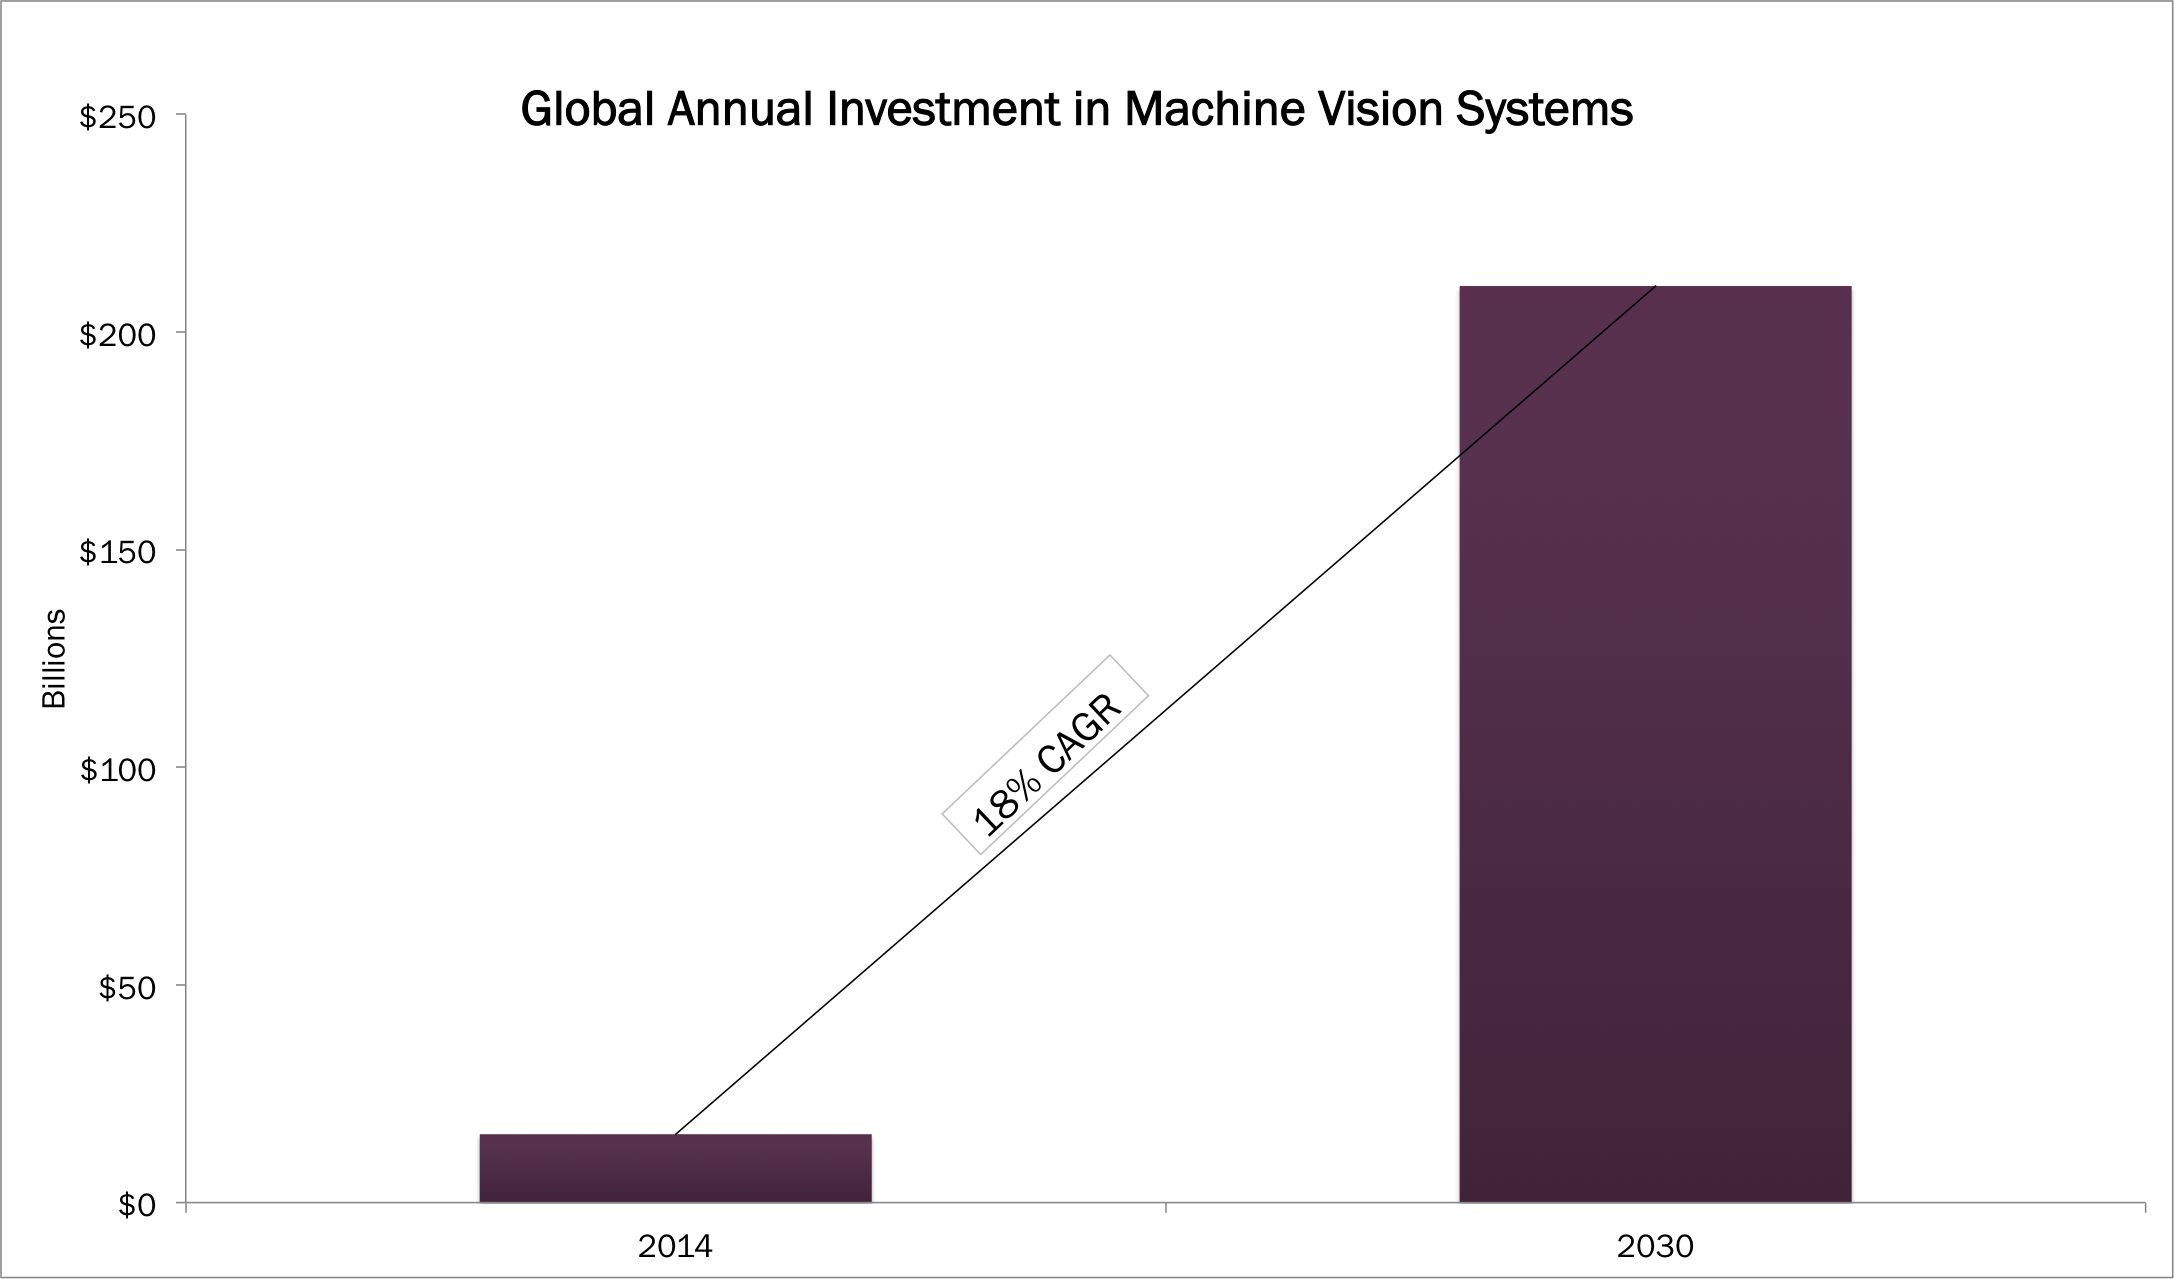 machine vision systems, ARK Invest, retail robots, industrial innovation, Lowe's, robotics, automation